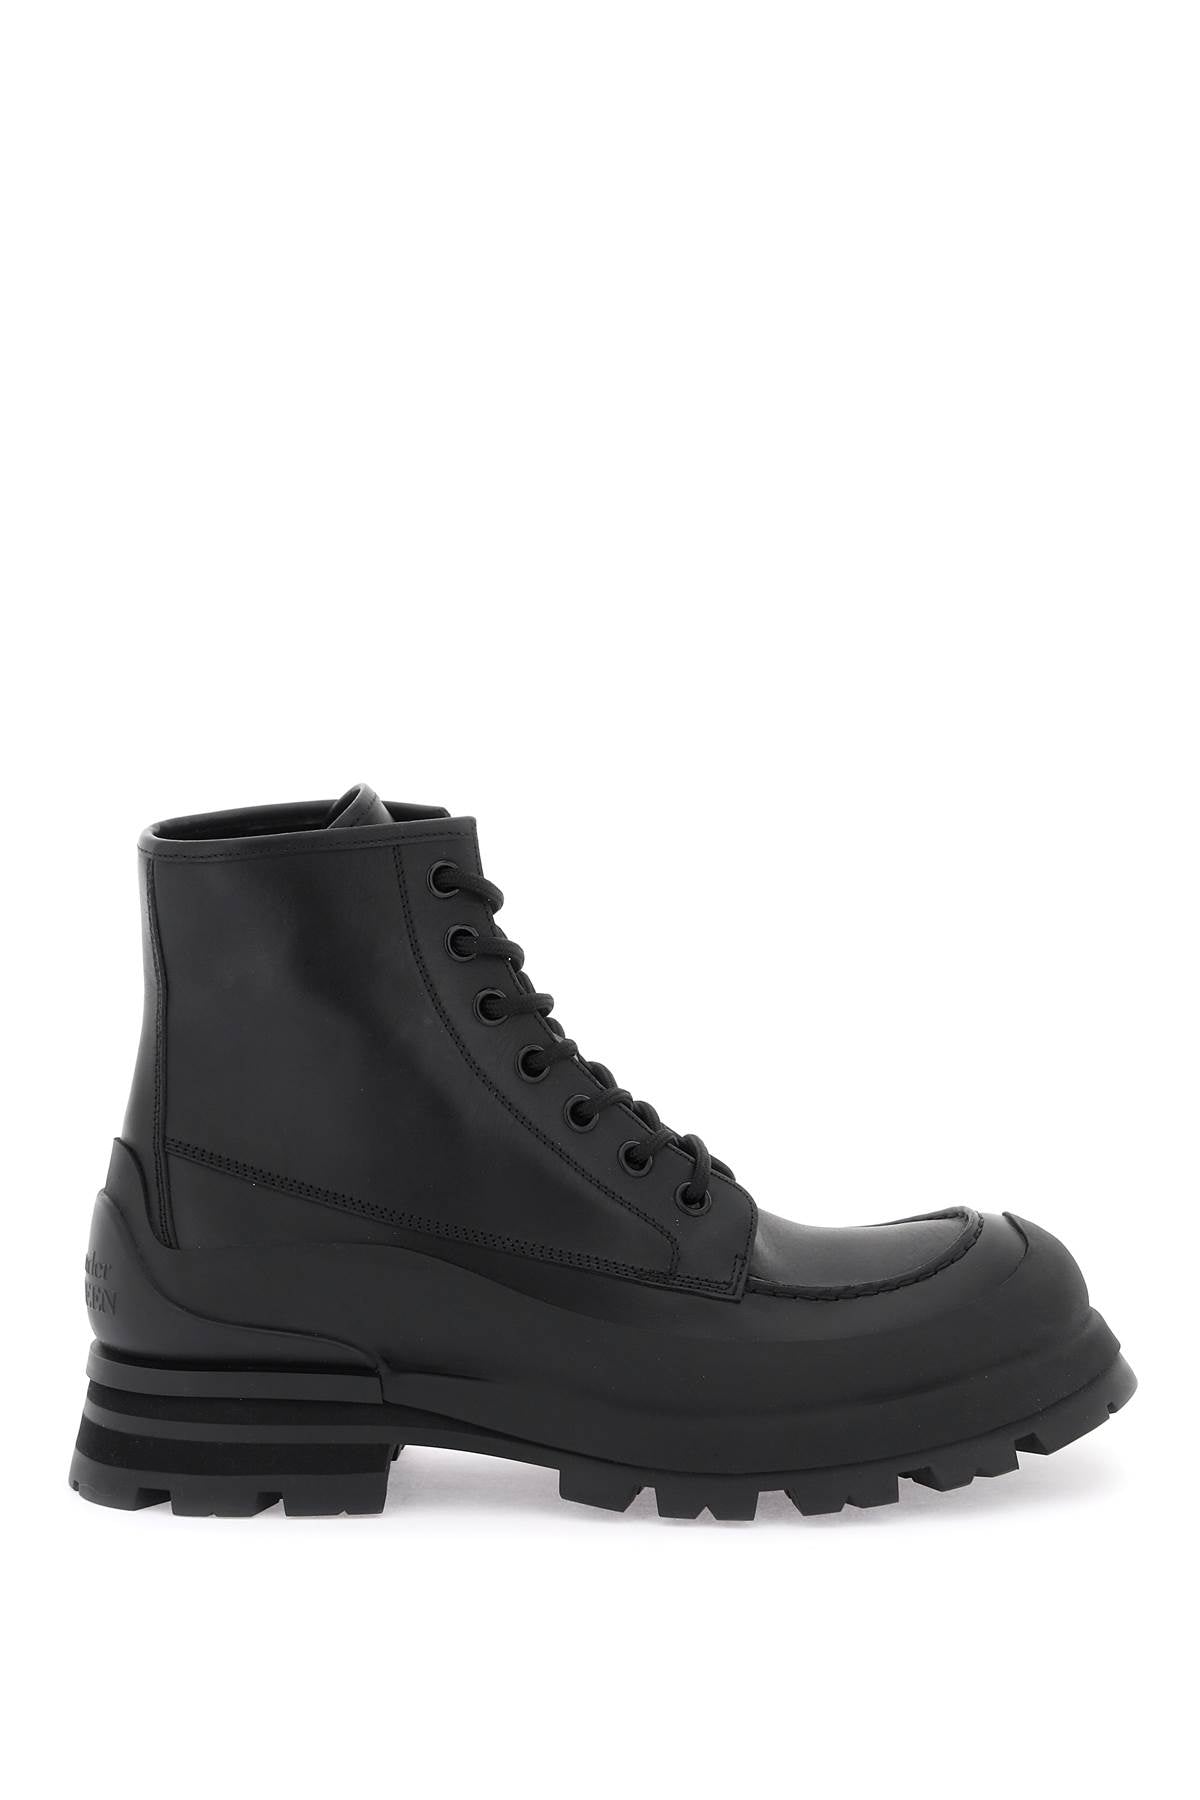 Alexander McQueen lace-up ankle boots - Black